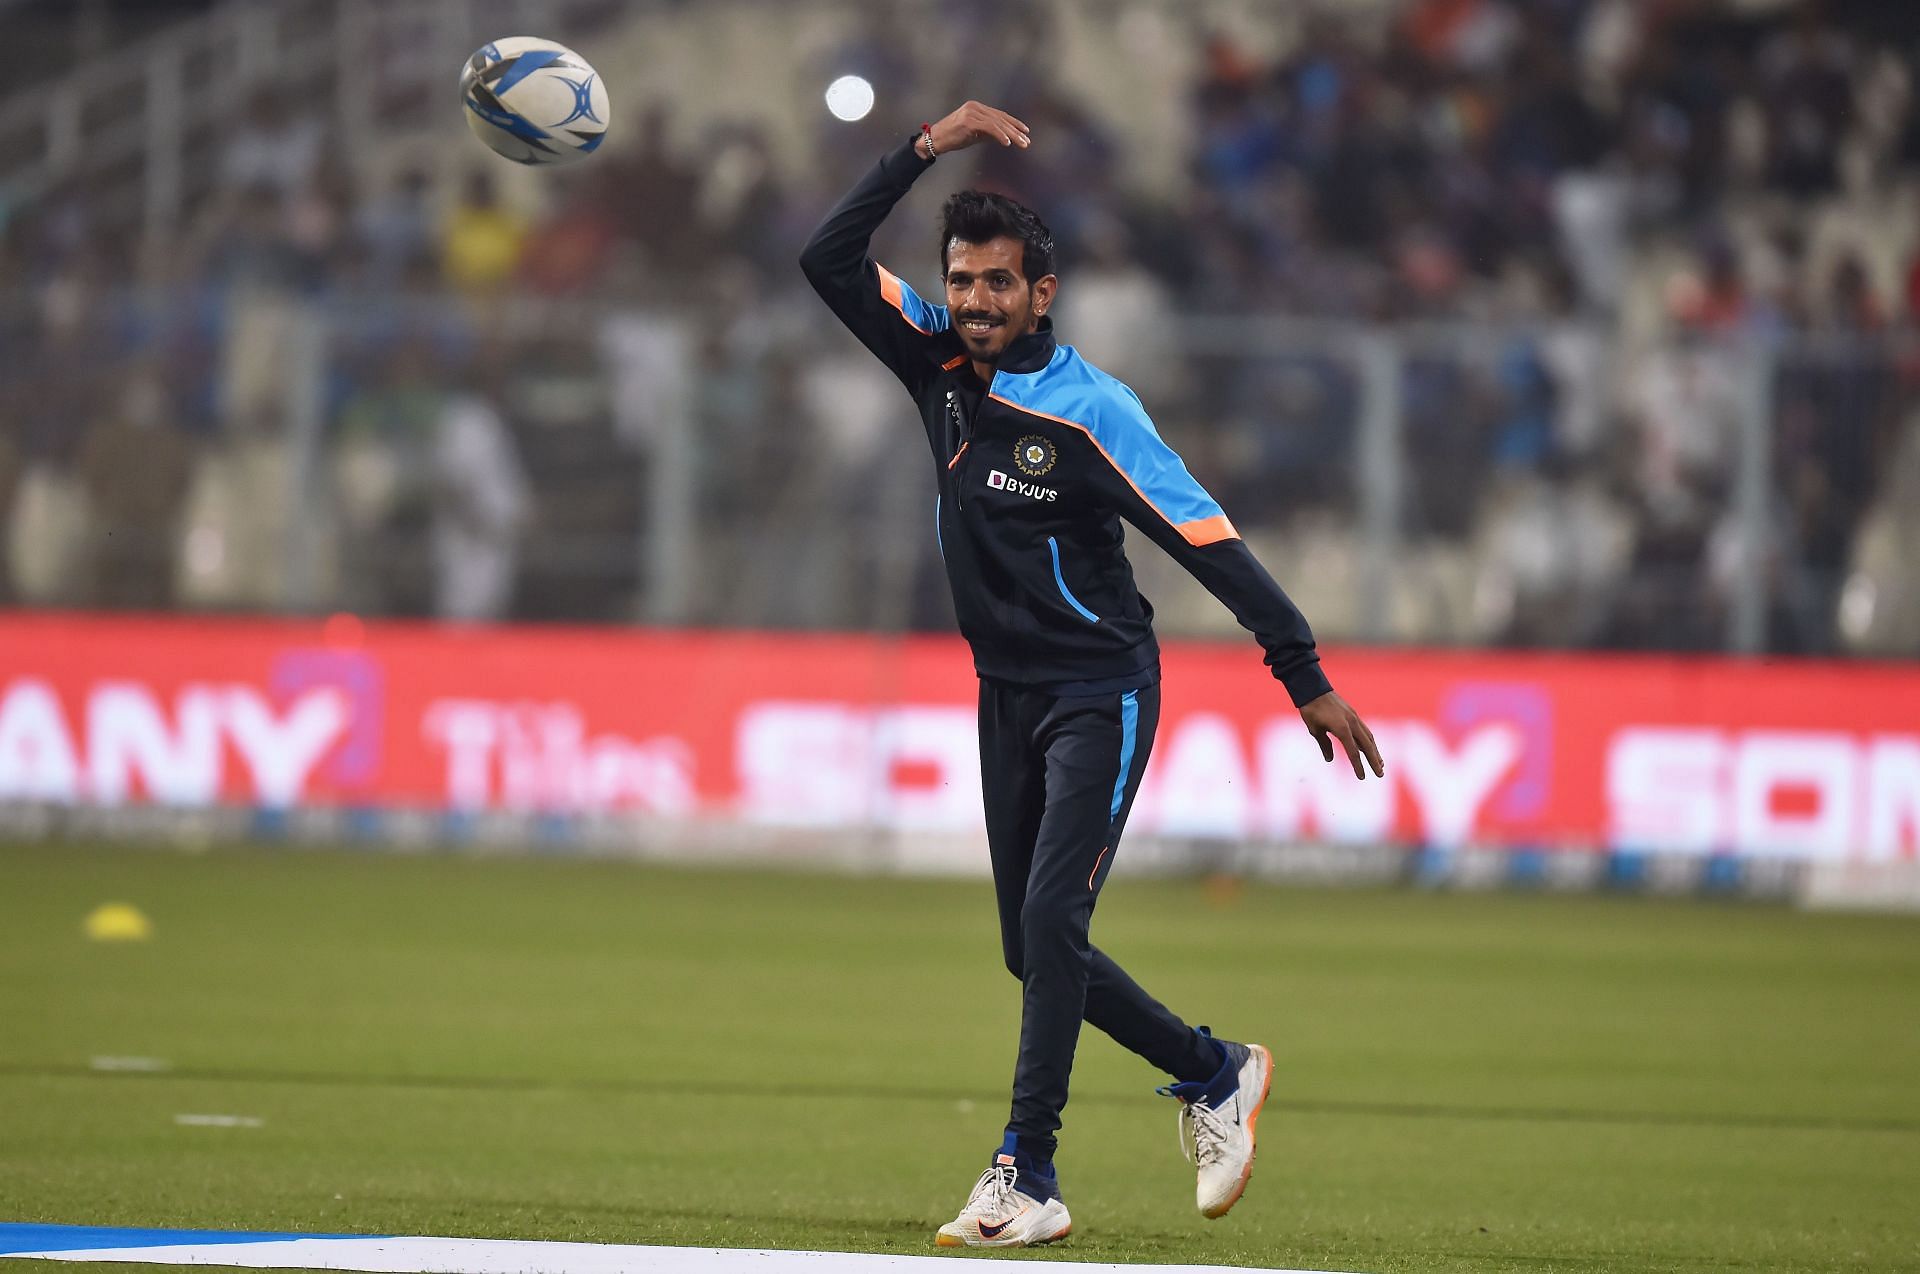 [Watch] Yuzvendra Chahal trains intensely in the nets and gym as he aims to make a comeback into the Indian team